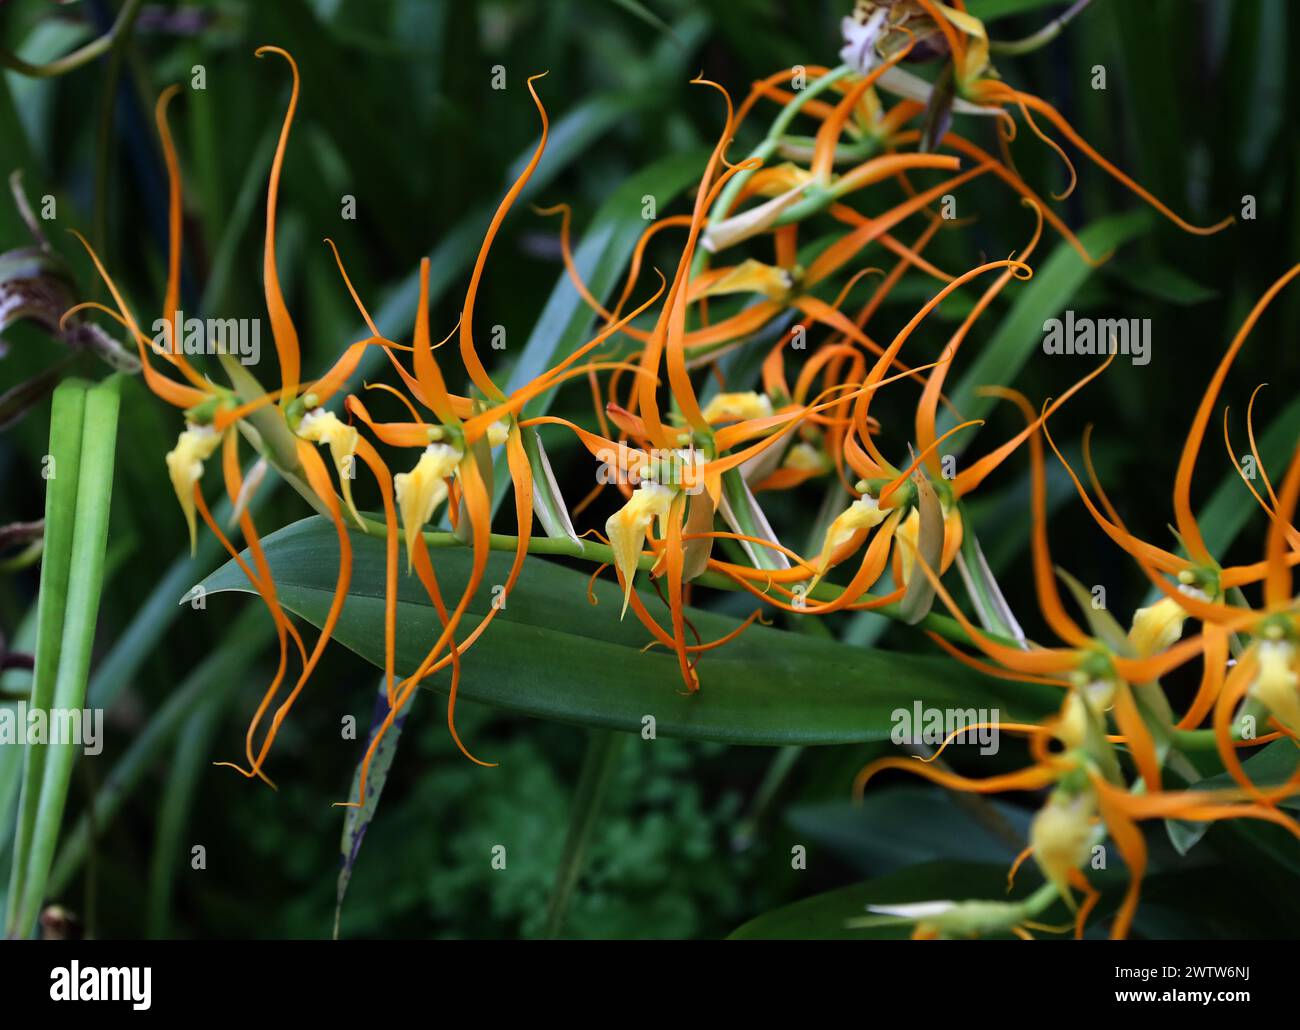 Orchid, Brassia pozoi, Oncidiinae, Orchidaceae. Ecuador and Peru. Brassia is a genus of orchids classified in the subtribe Oncidiinae. It is native to Stock Photo